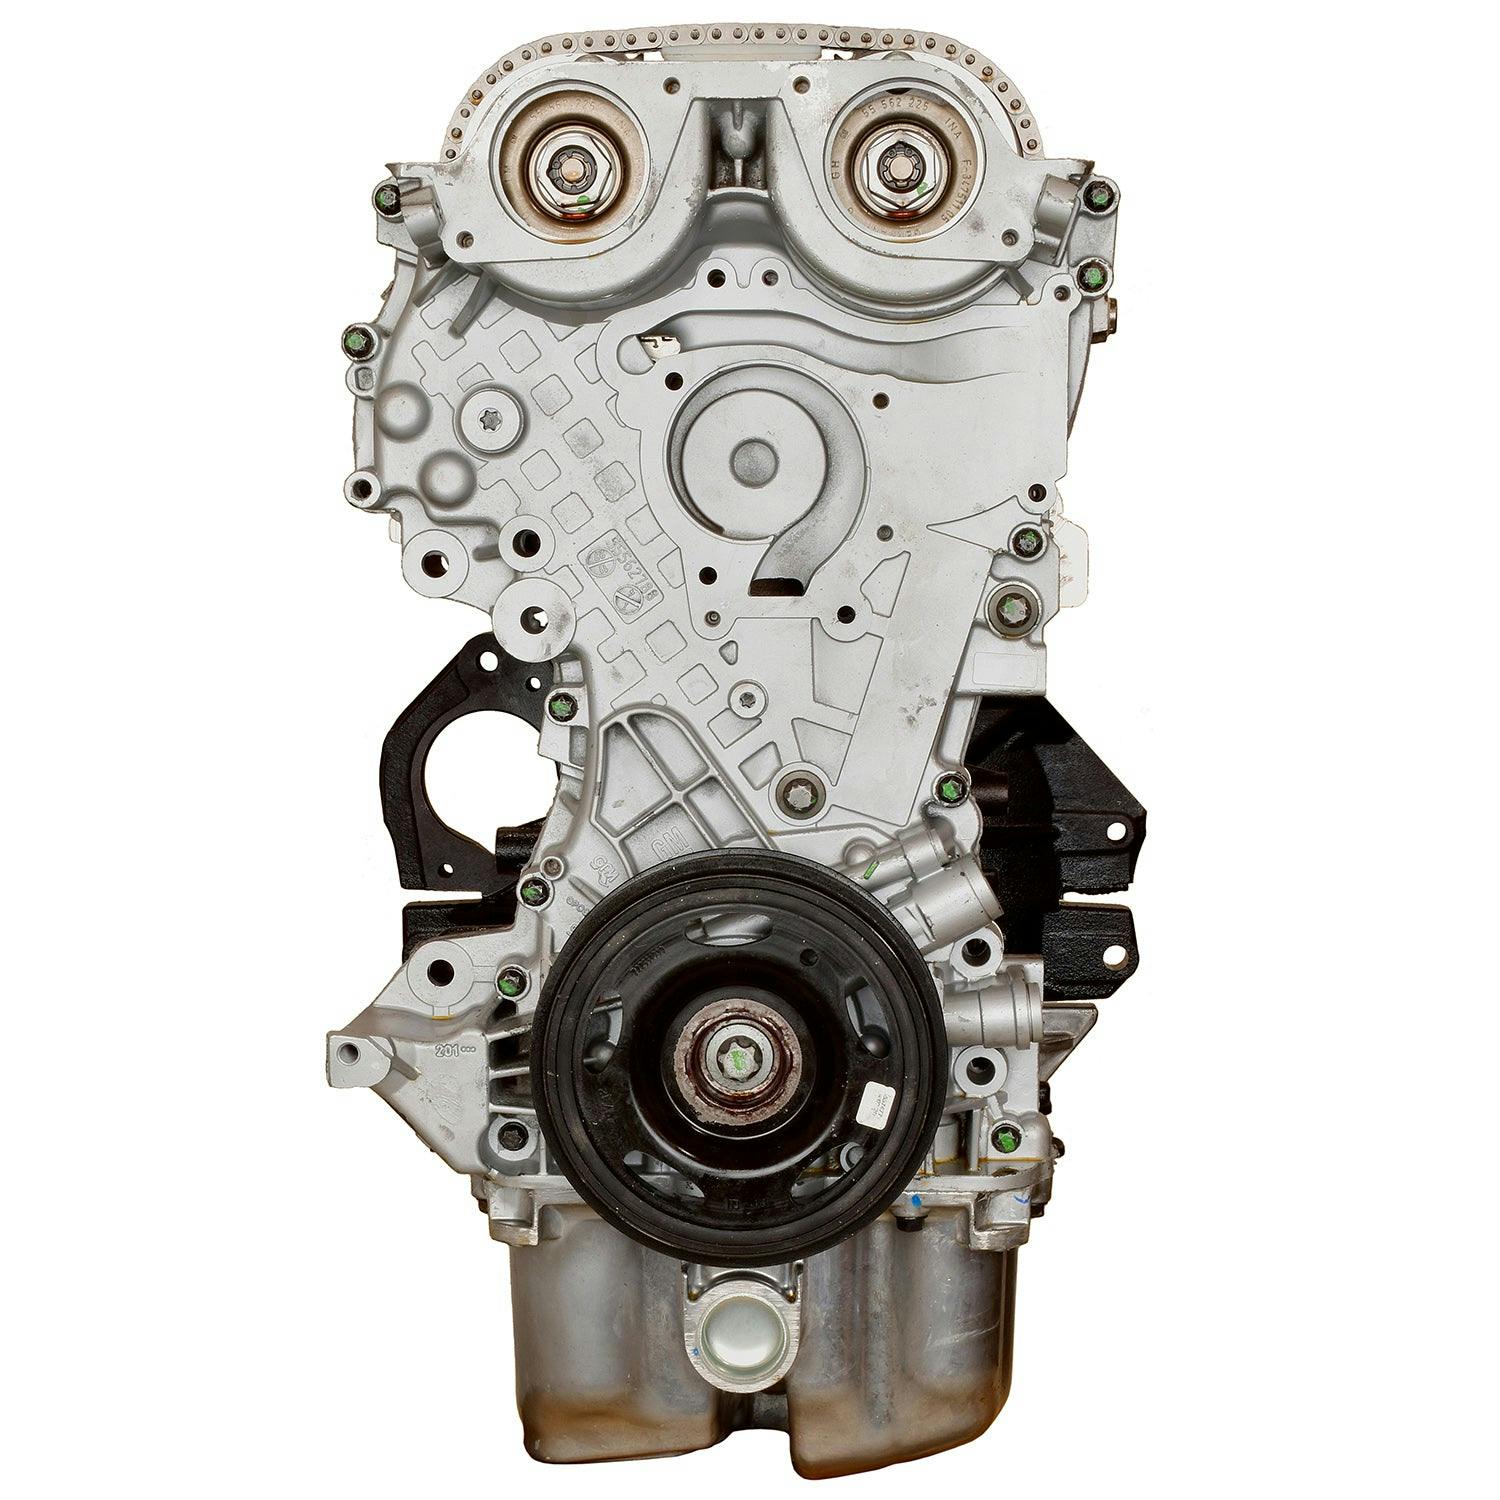 1.4L Inline-4 Engine for 2011-2021 Buick Encore/Chevrolet Cruze, Cruze Limited, Sonic, Trax